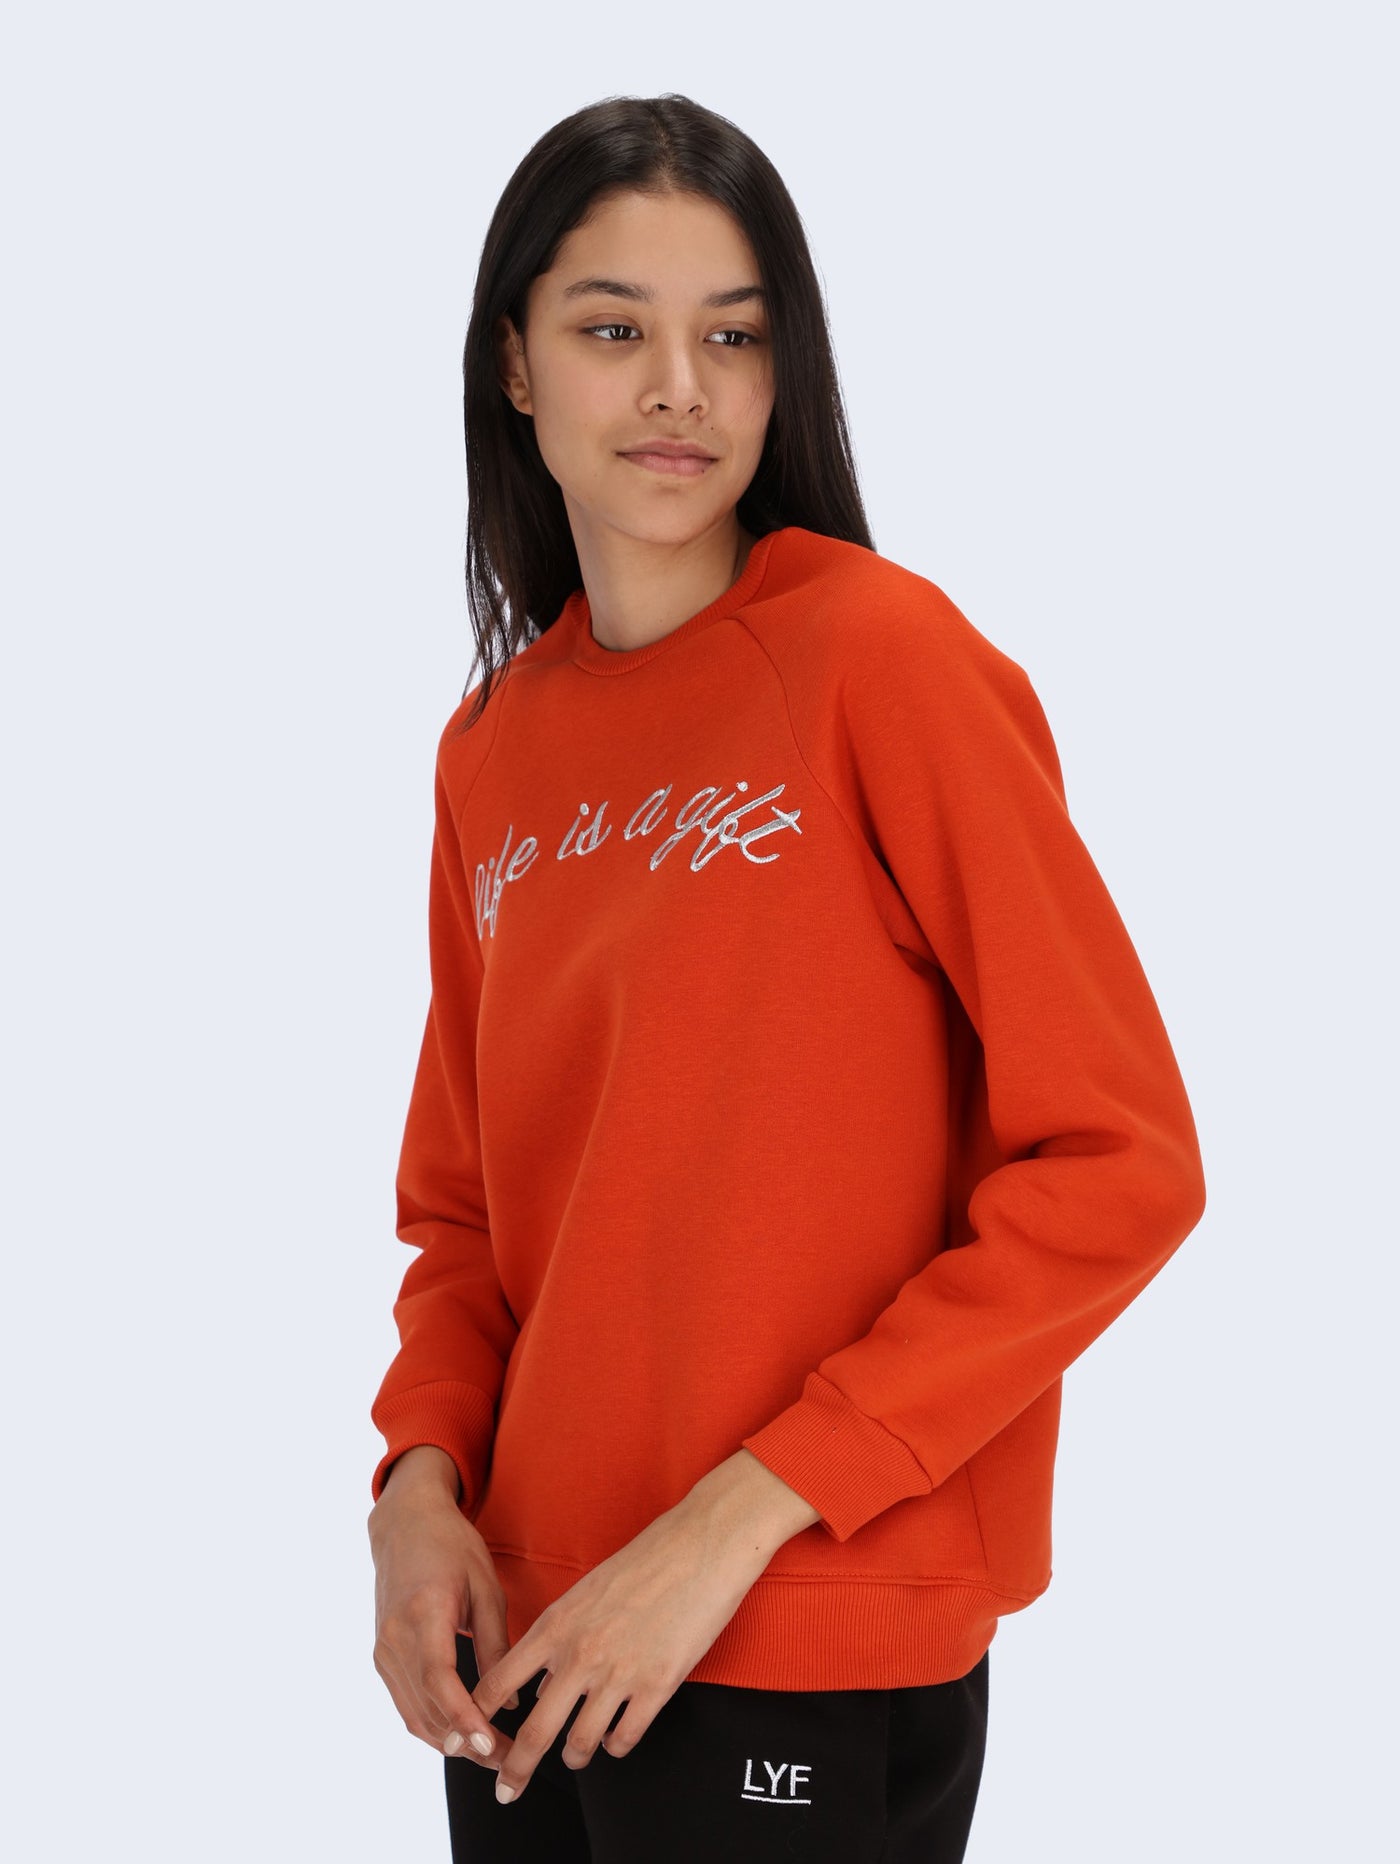 Life is A Gift Embroidered Sweatshirt